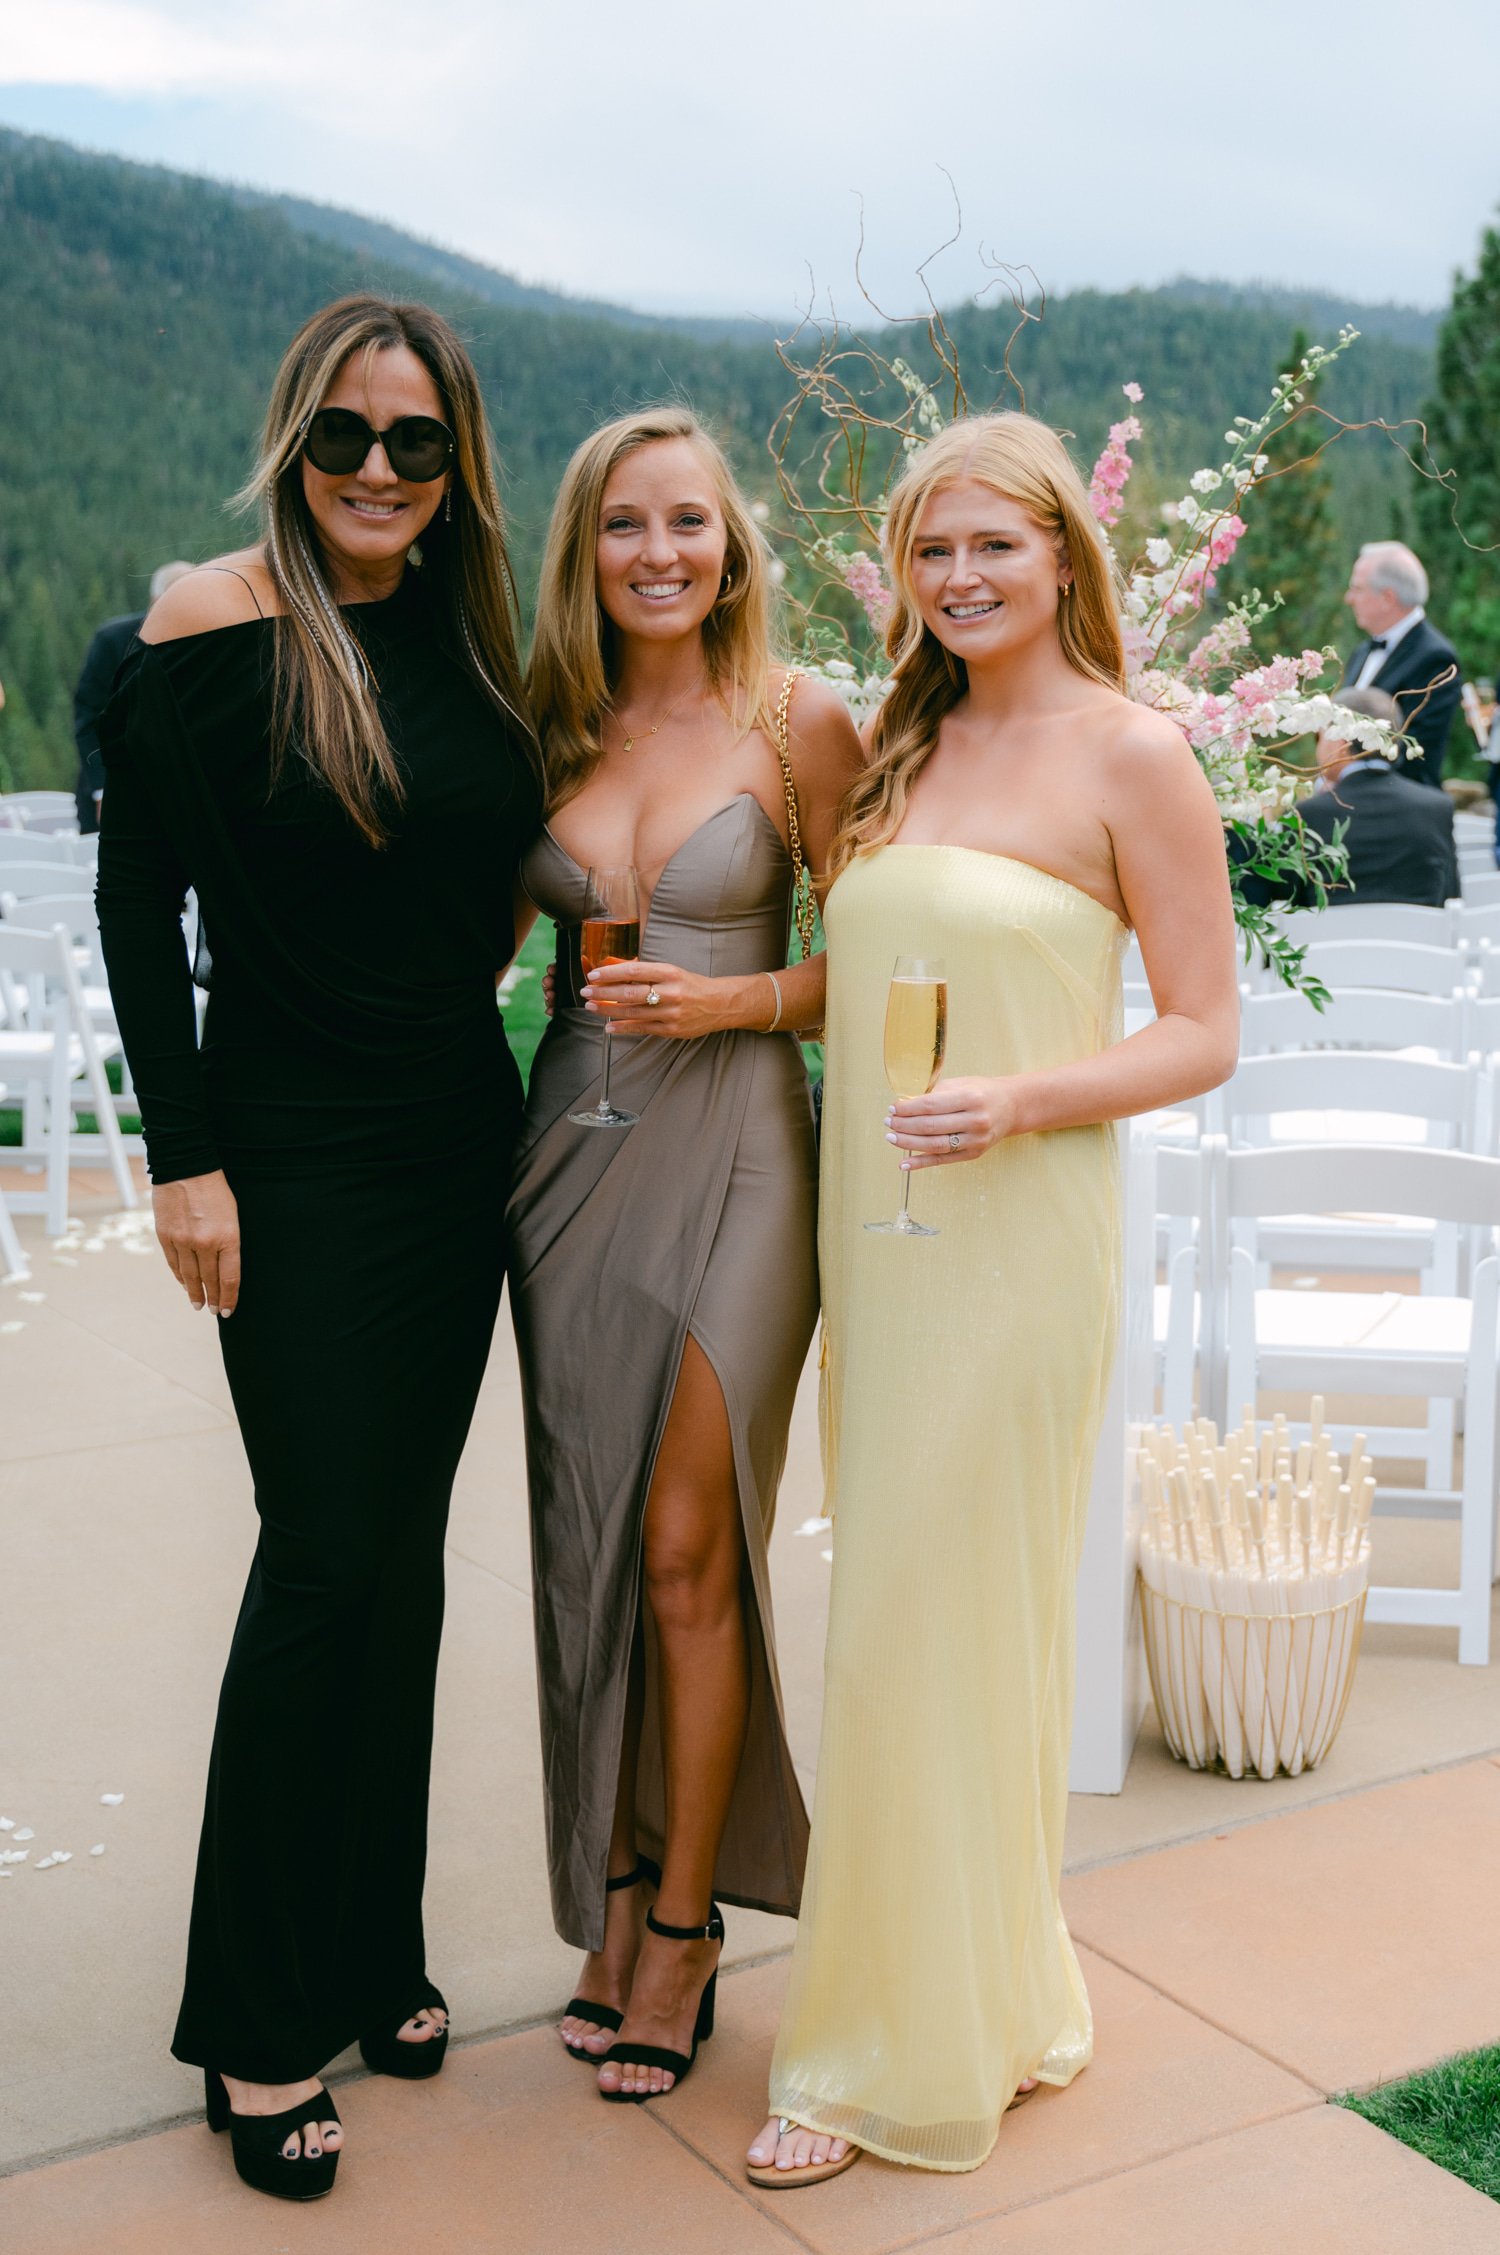 Martis Camp Wedding, photo of the female guests enjoying a drink before ceremony